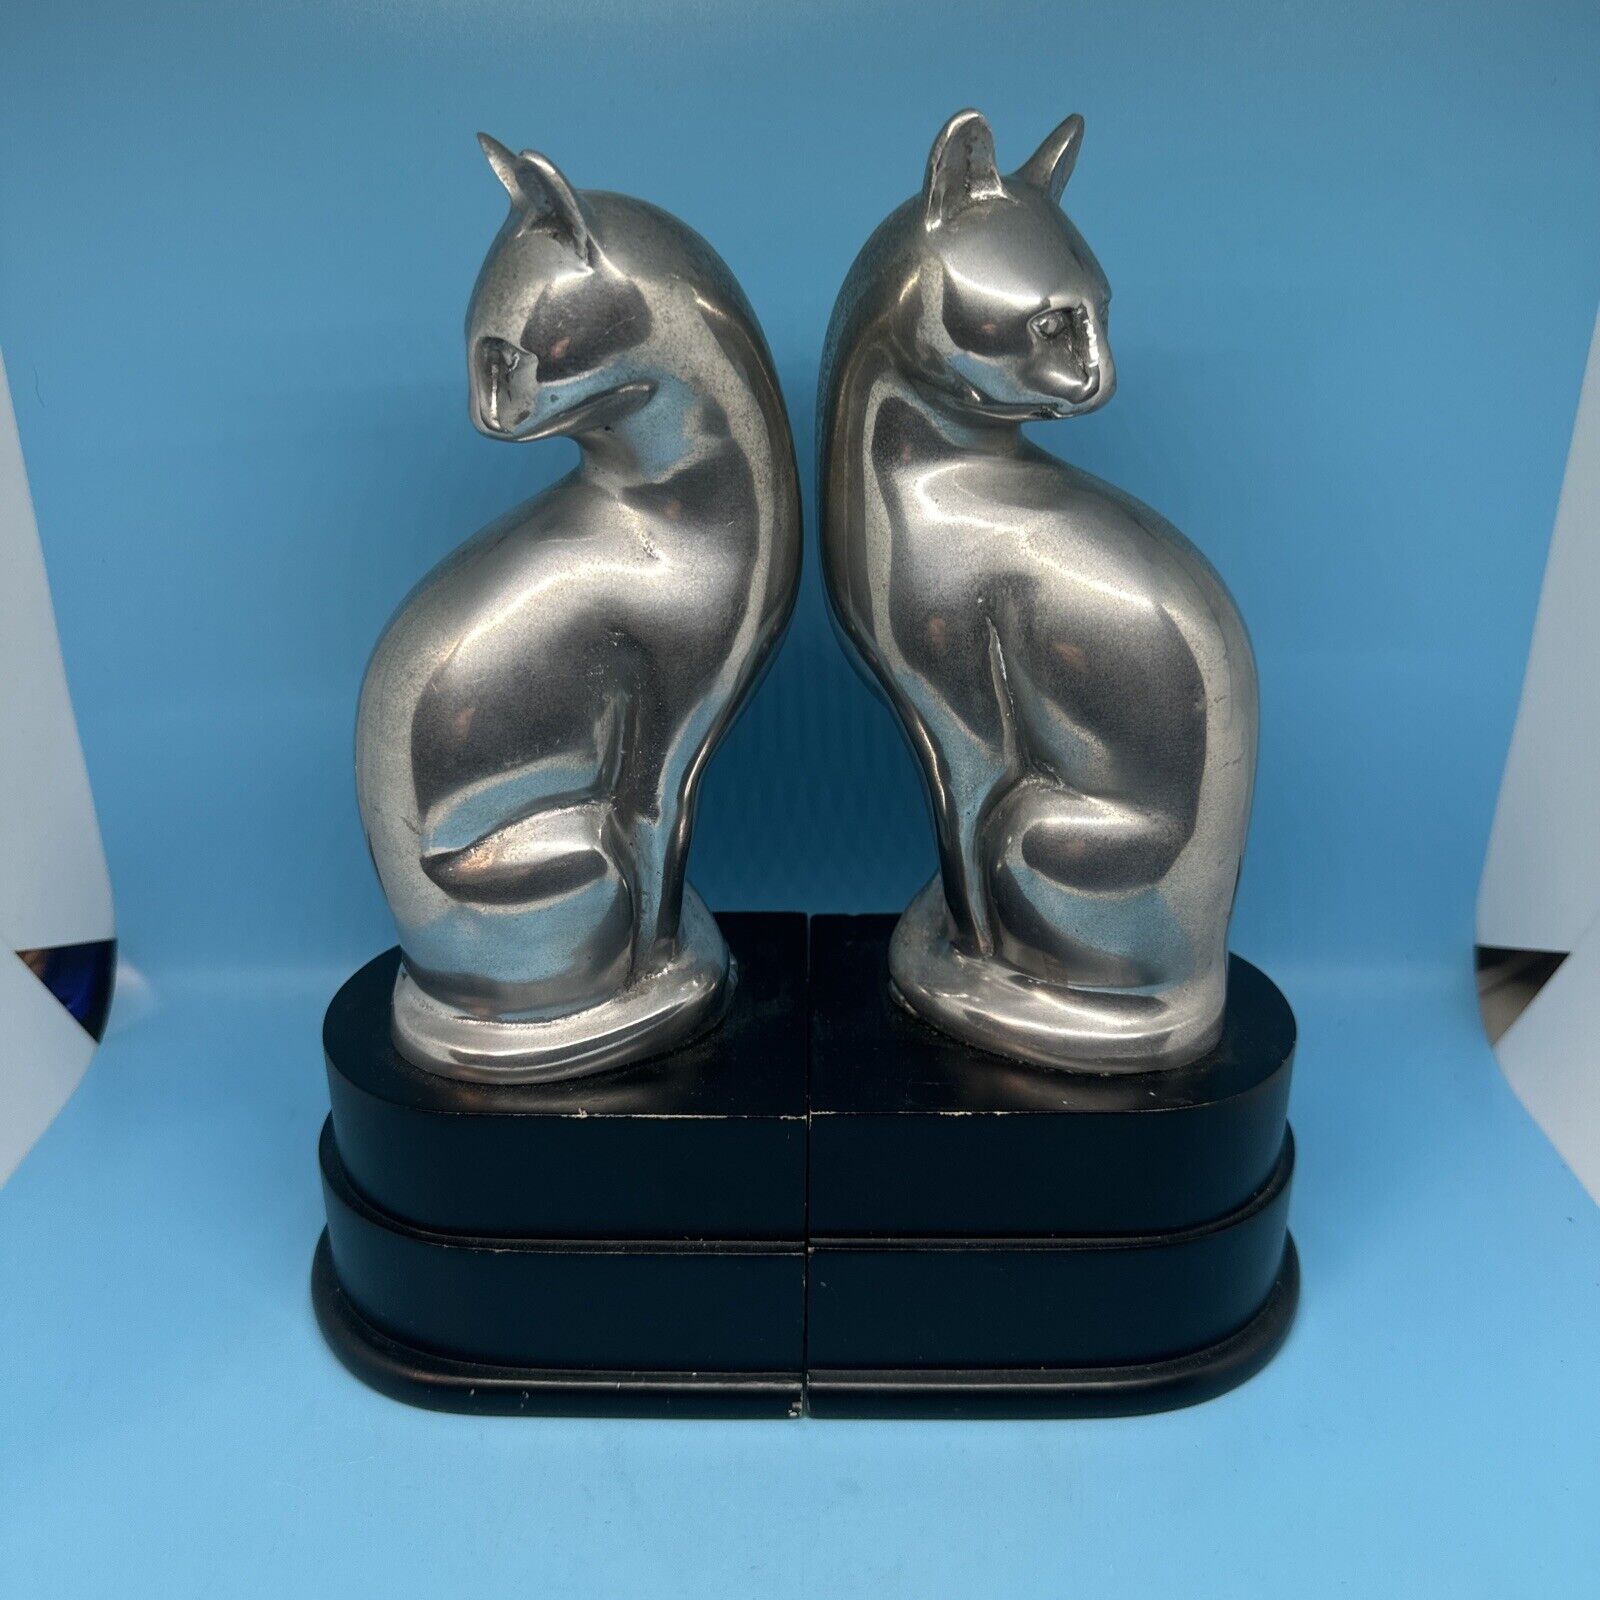 Vintage Art Deco Silver Colored Pot Metal Pair of Siamese Cat Bookends,SPI